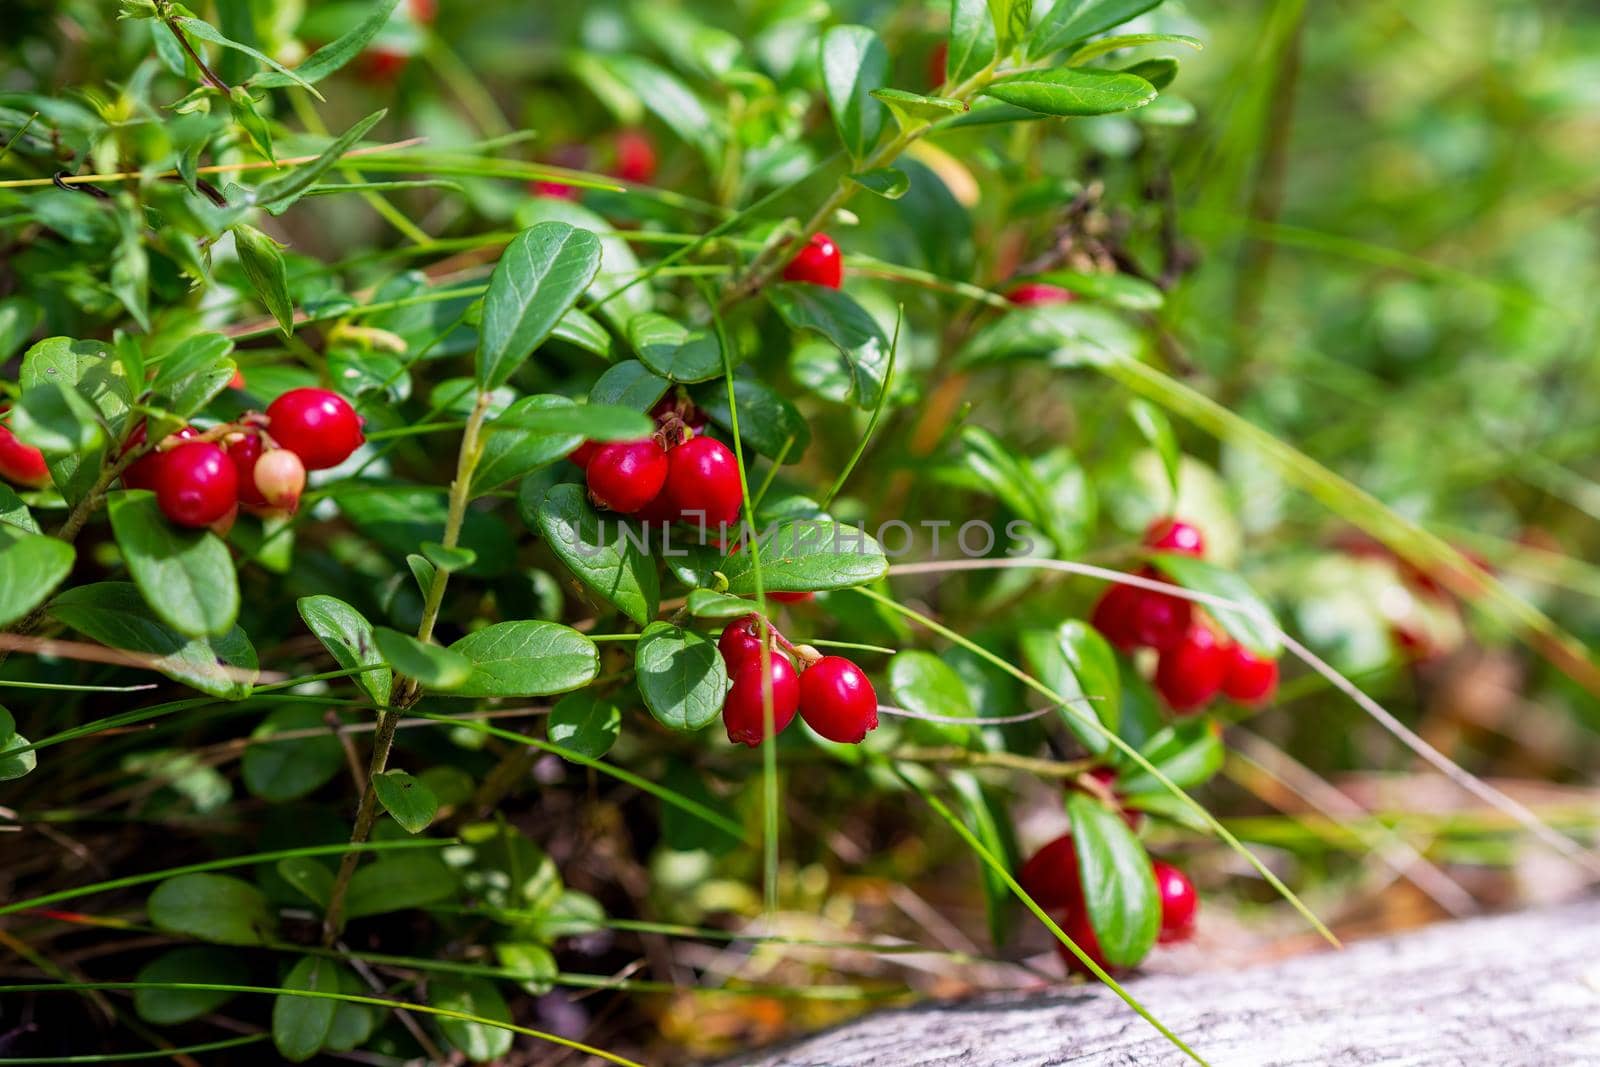 Bush of a ripe cowberry in forest. Ripe red lingonberry, partridgeberry, or cowberry grows in pine forest.